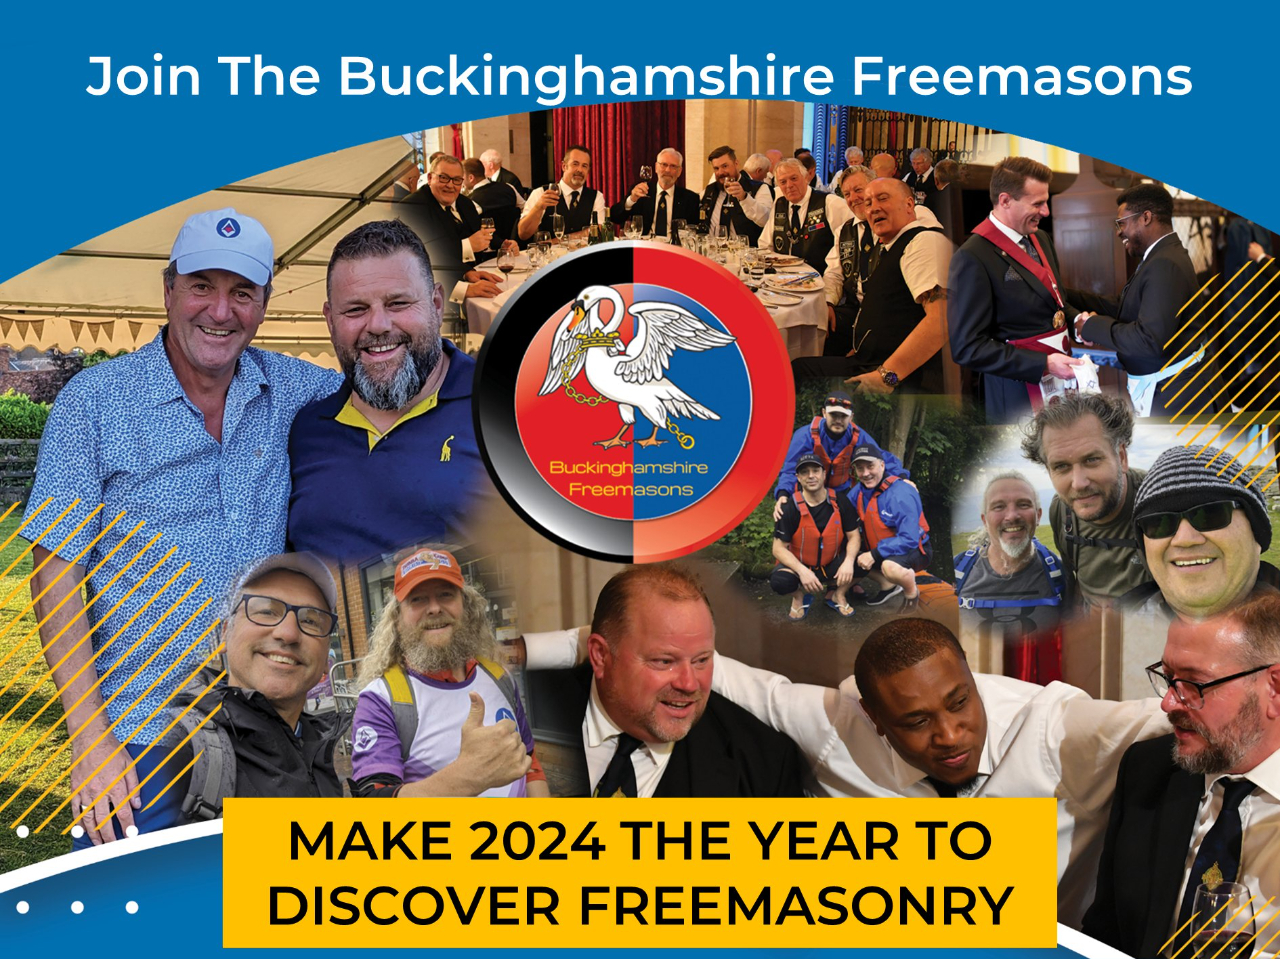 Our Buckinghamshire Freemasons Live Event is THIS TUESDAY!